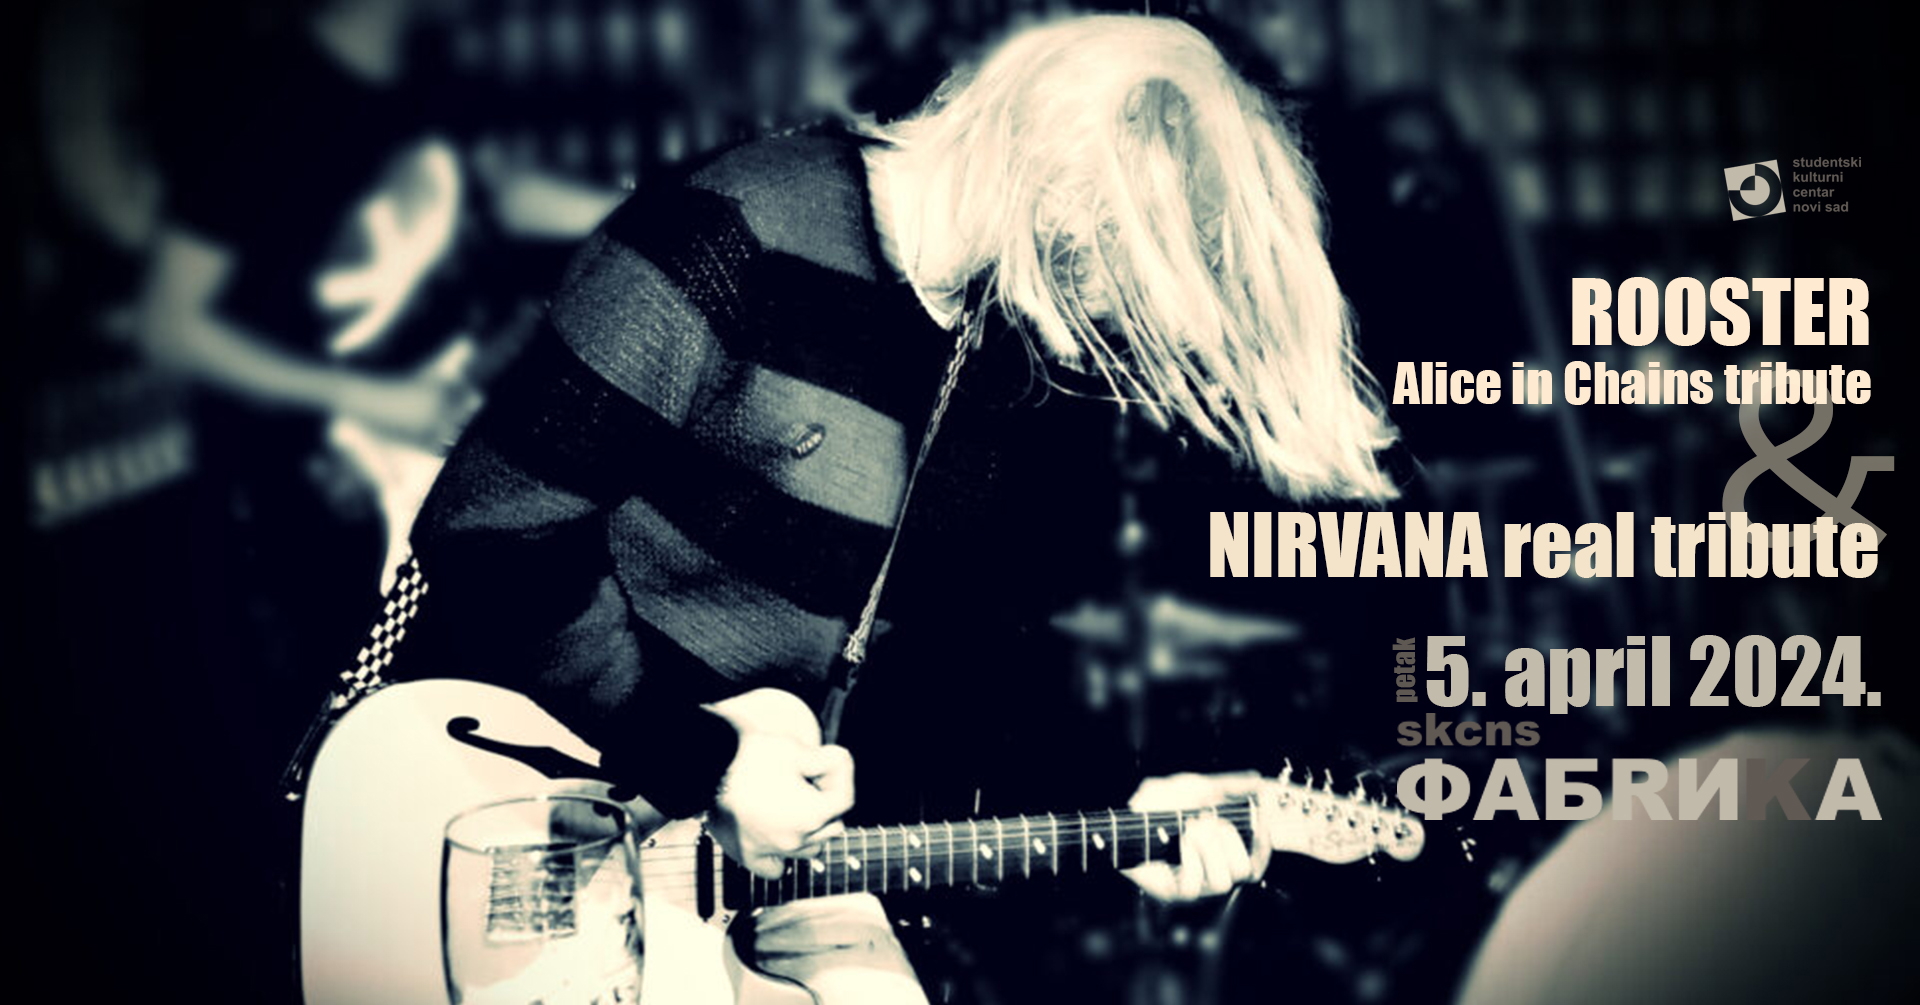 Rooster Alice in Chains tribute band i Nirvana real tribute band // SKCNS Fabrika // 05.04.